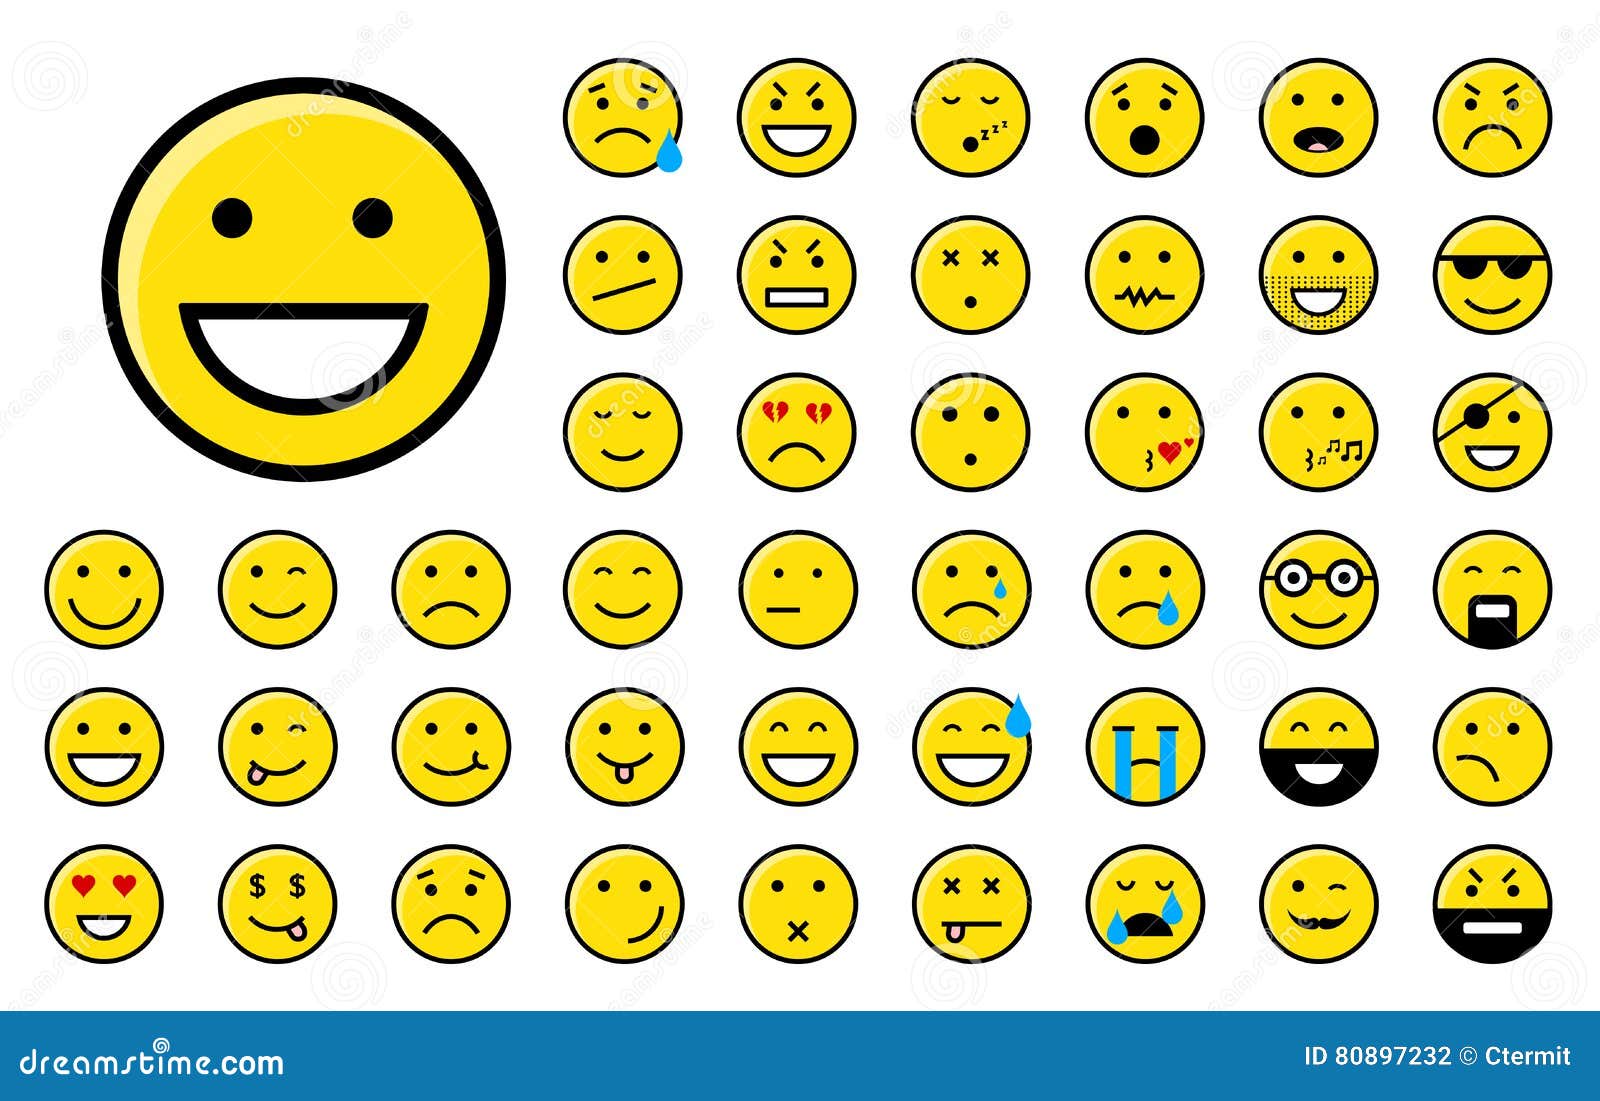 Color smiley stock vector. Illustration of angry, confused - 80897232